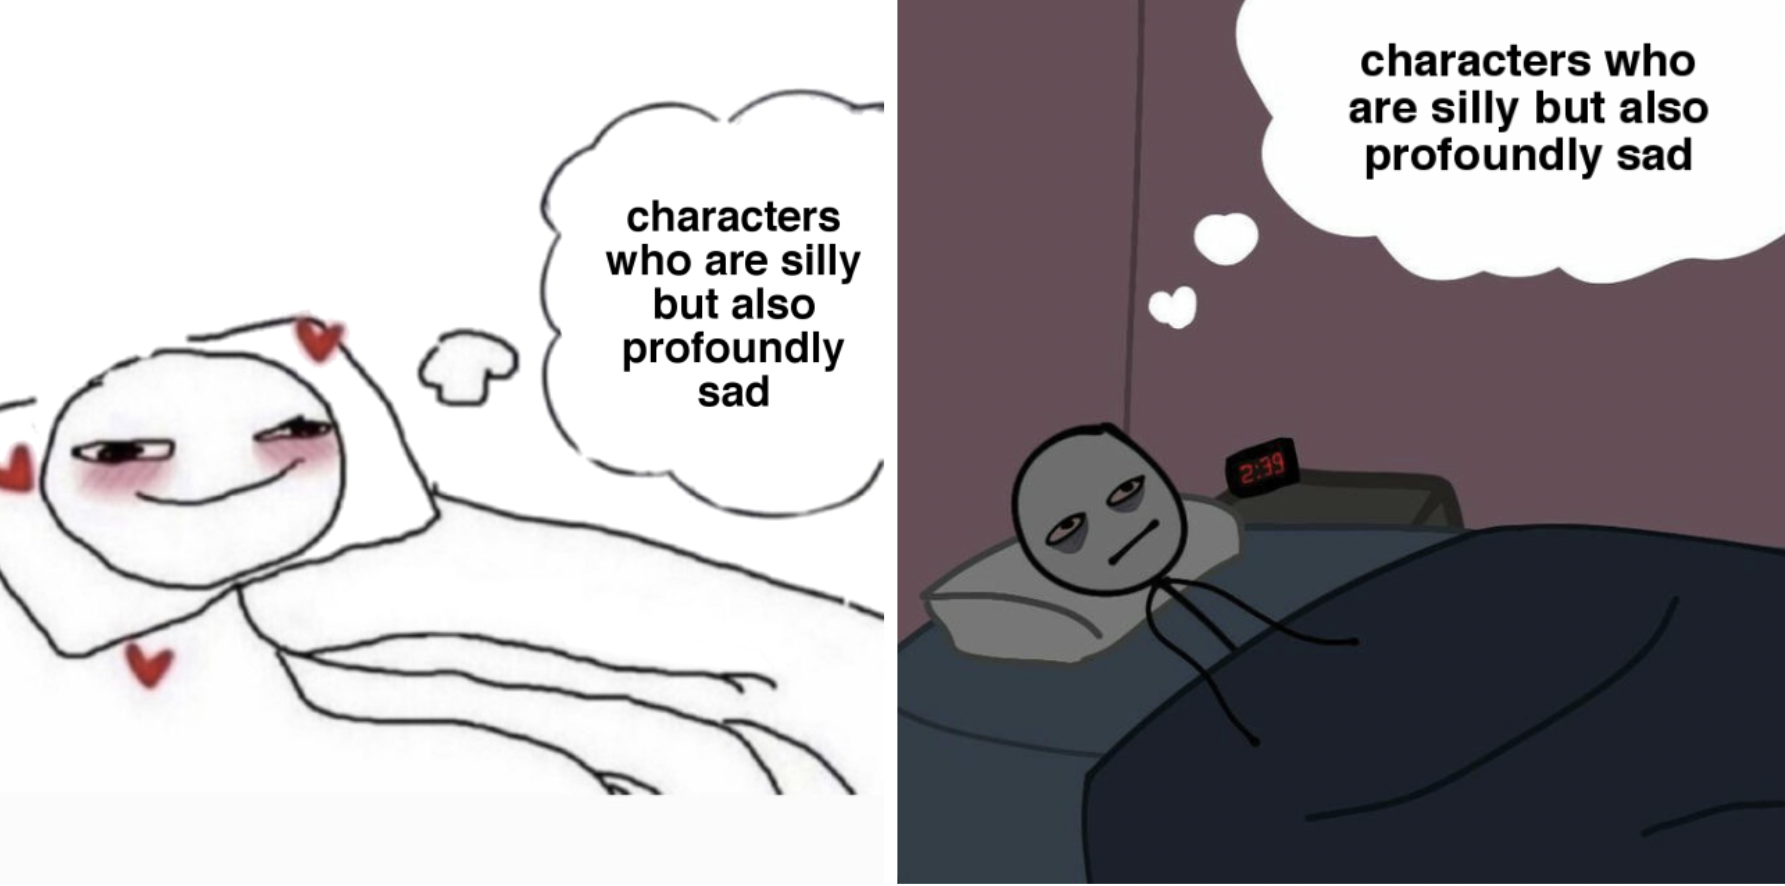 Two pictures of the same stick figure laying down in bed, one with a smile and another distressed, dreaming about "characters who are silly but also profoundly sad."